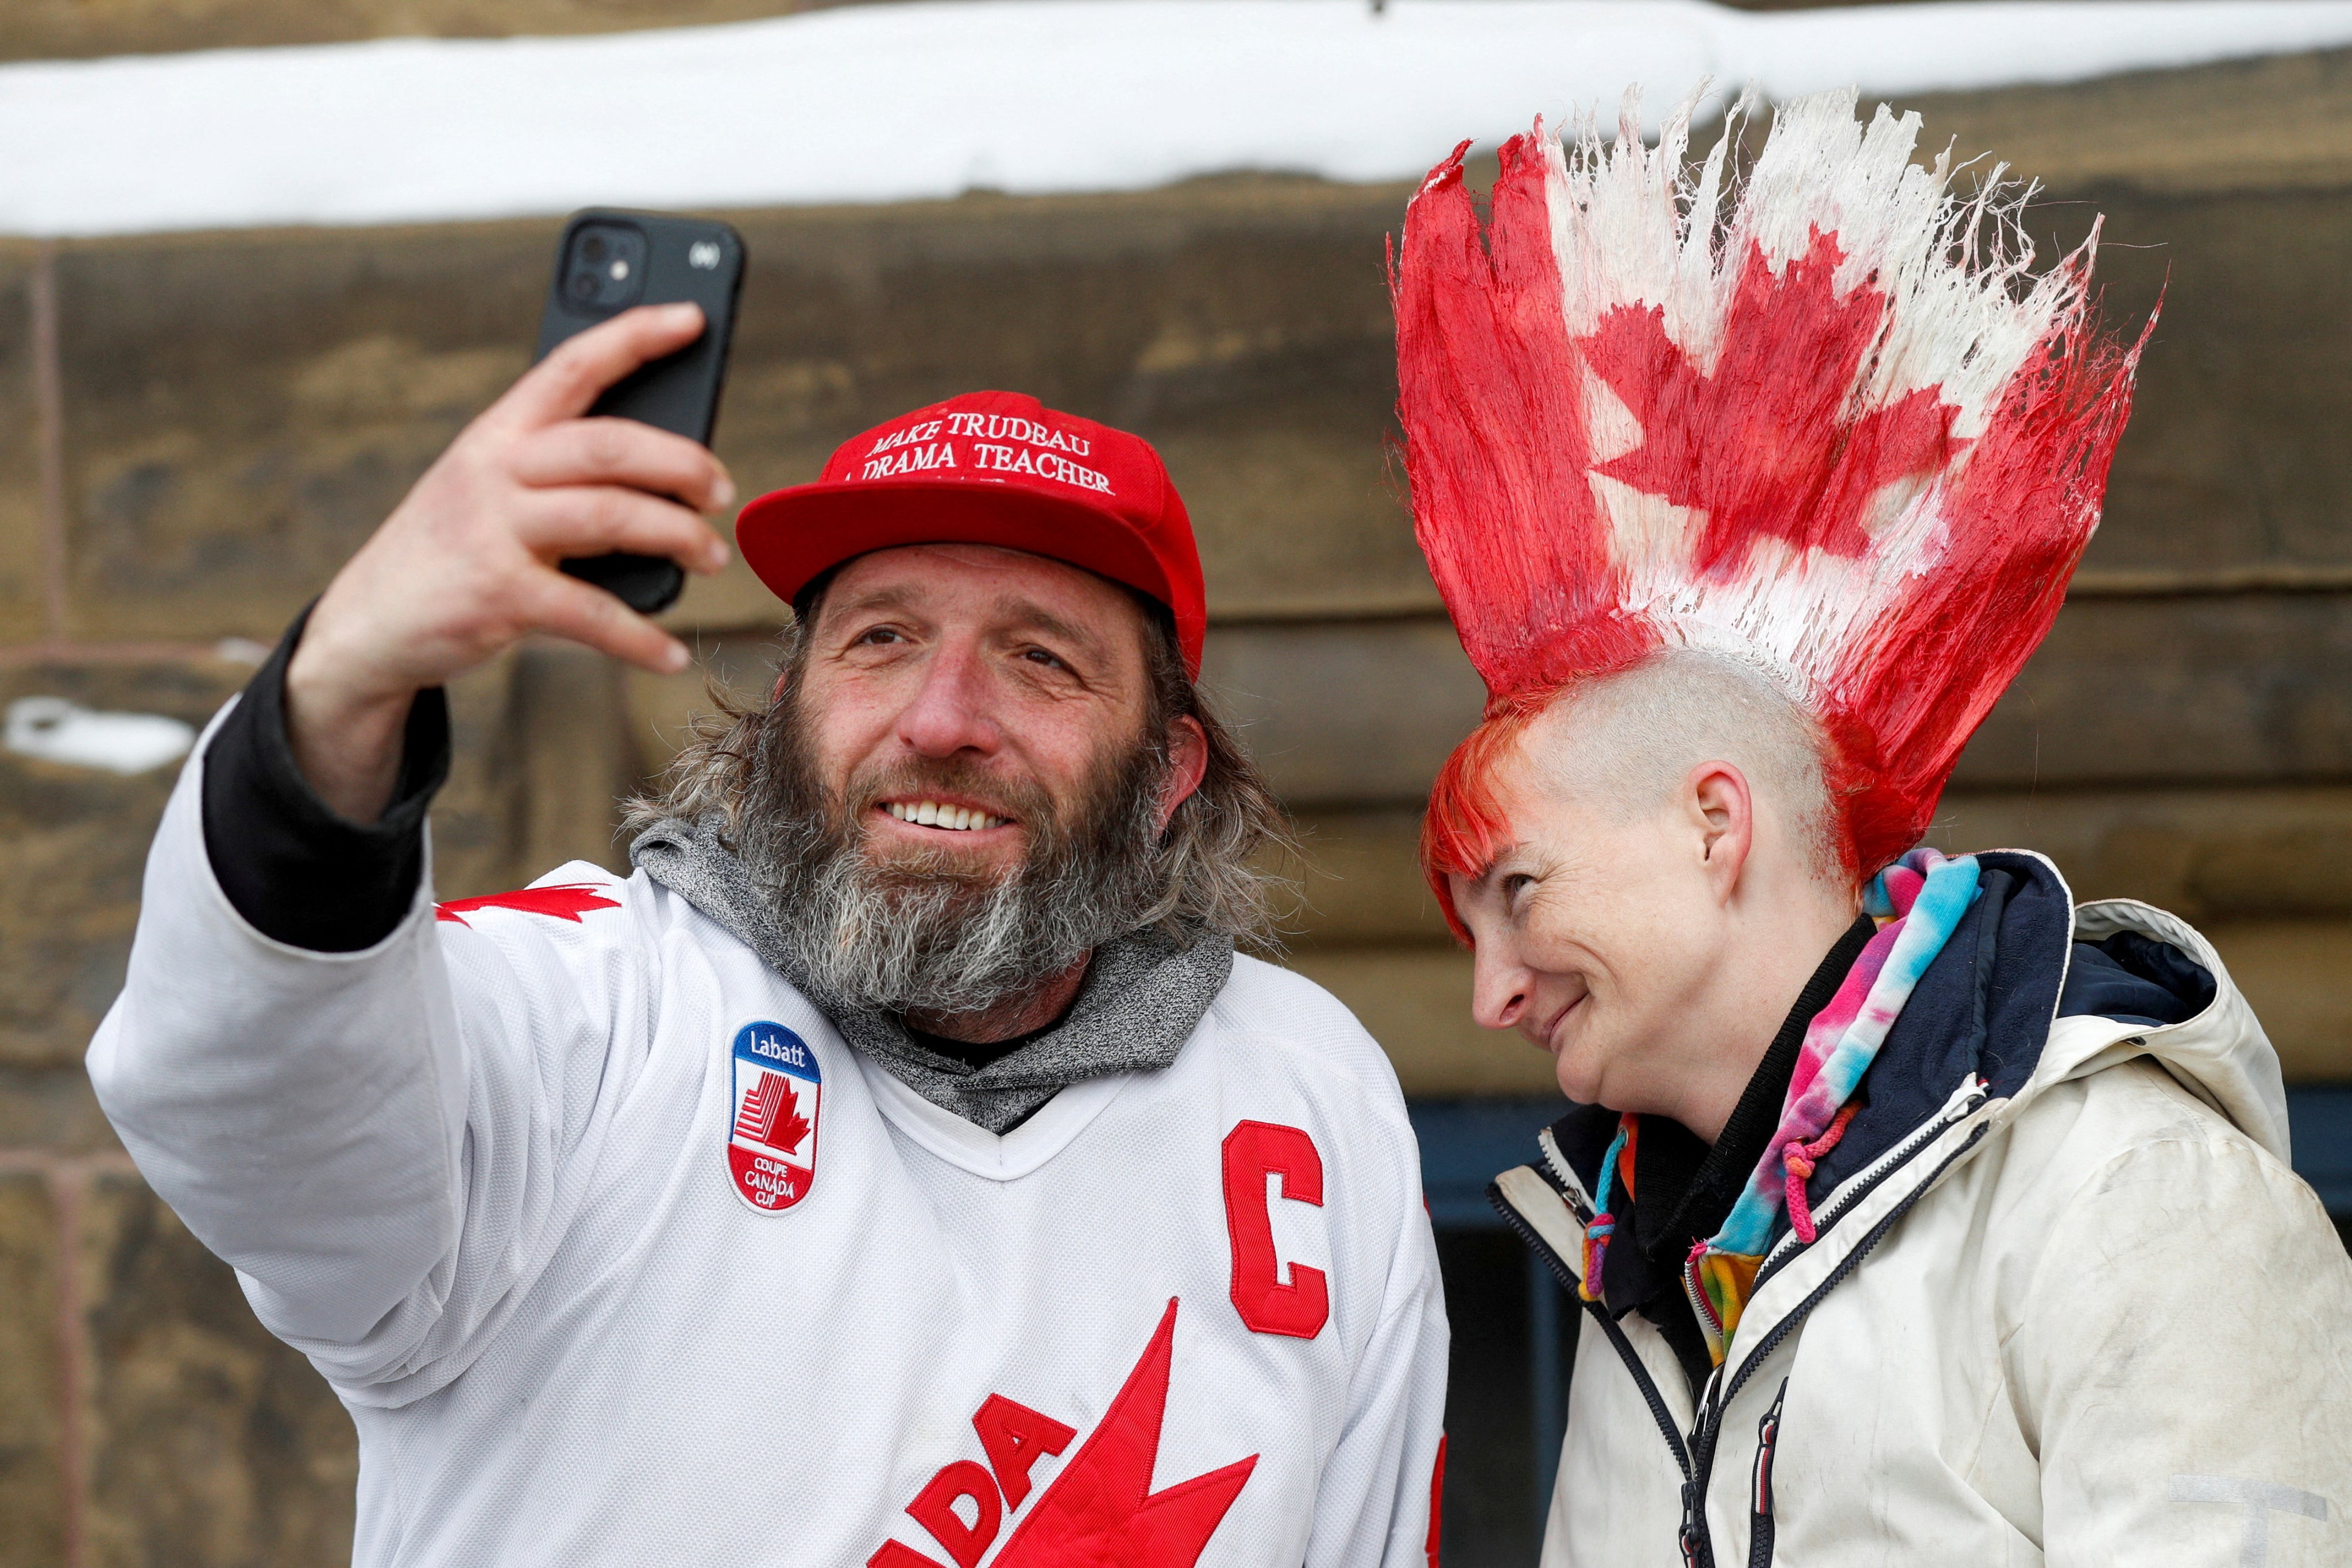 A man in a “Make Trudeau a drama teacher again” cap takes a selfie with a woman whose mohawk is painted with a Canadian maple leaf design, as truckers and supporters continue to protest against vaccine mandates, in Ottawa. Photo: Reuters